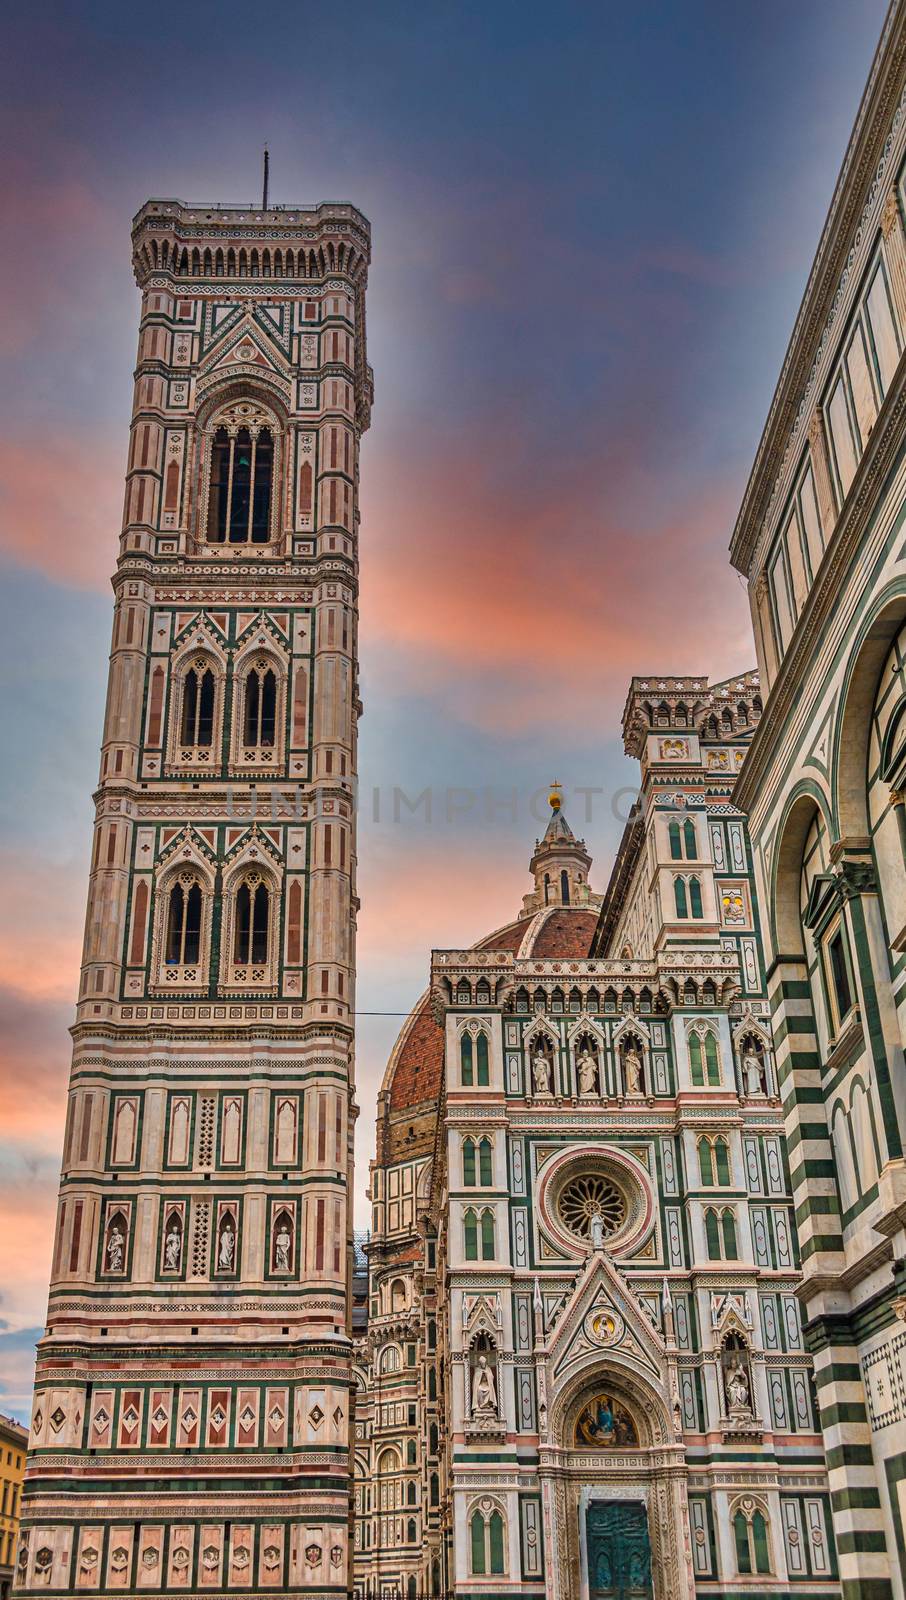 Bell Tower of Il Duomo at Dusk by dbvirago